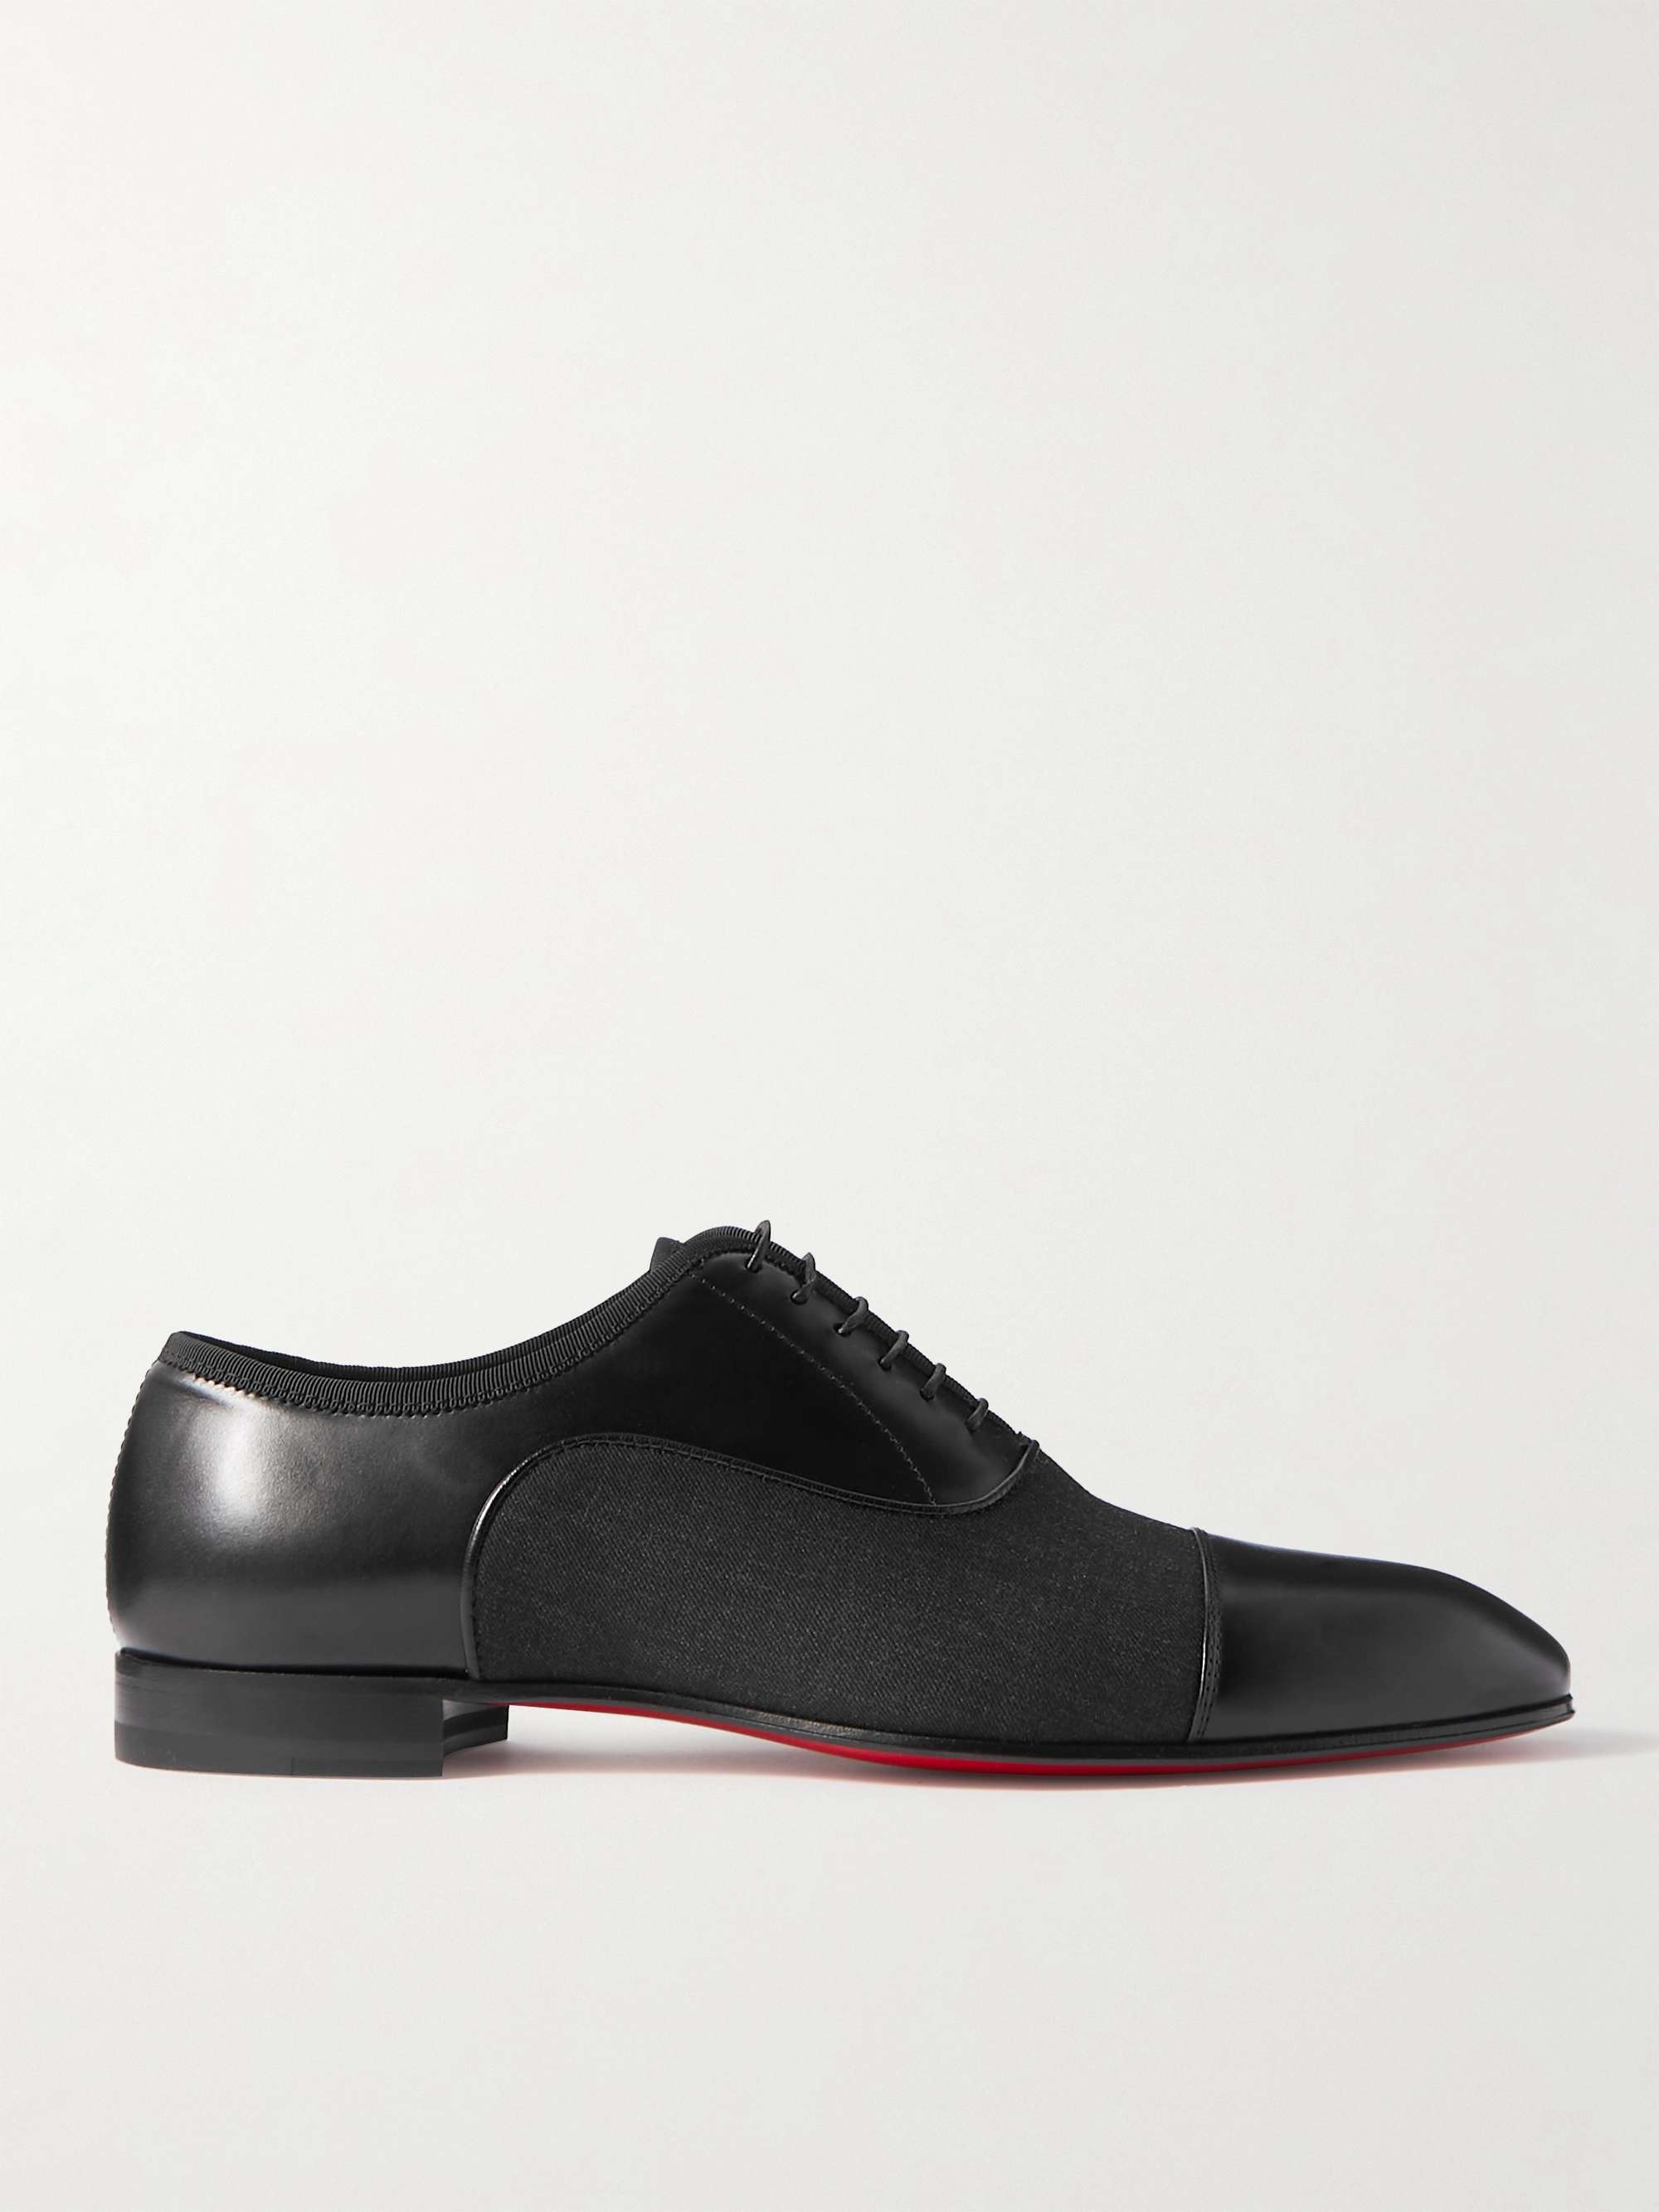 CHRISTIAN LOUBOUTIN Greggo Leather and Canvas Oxford Shoes | MR PORTER